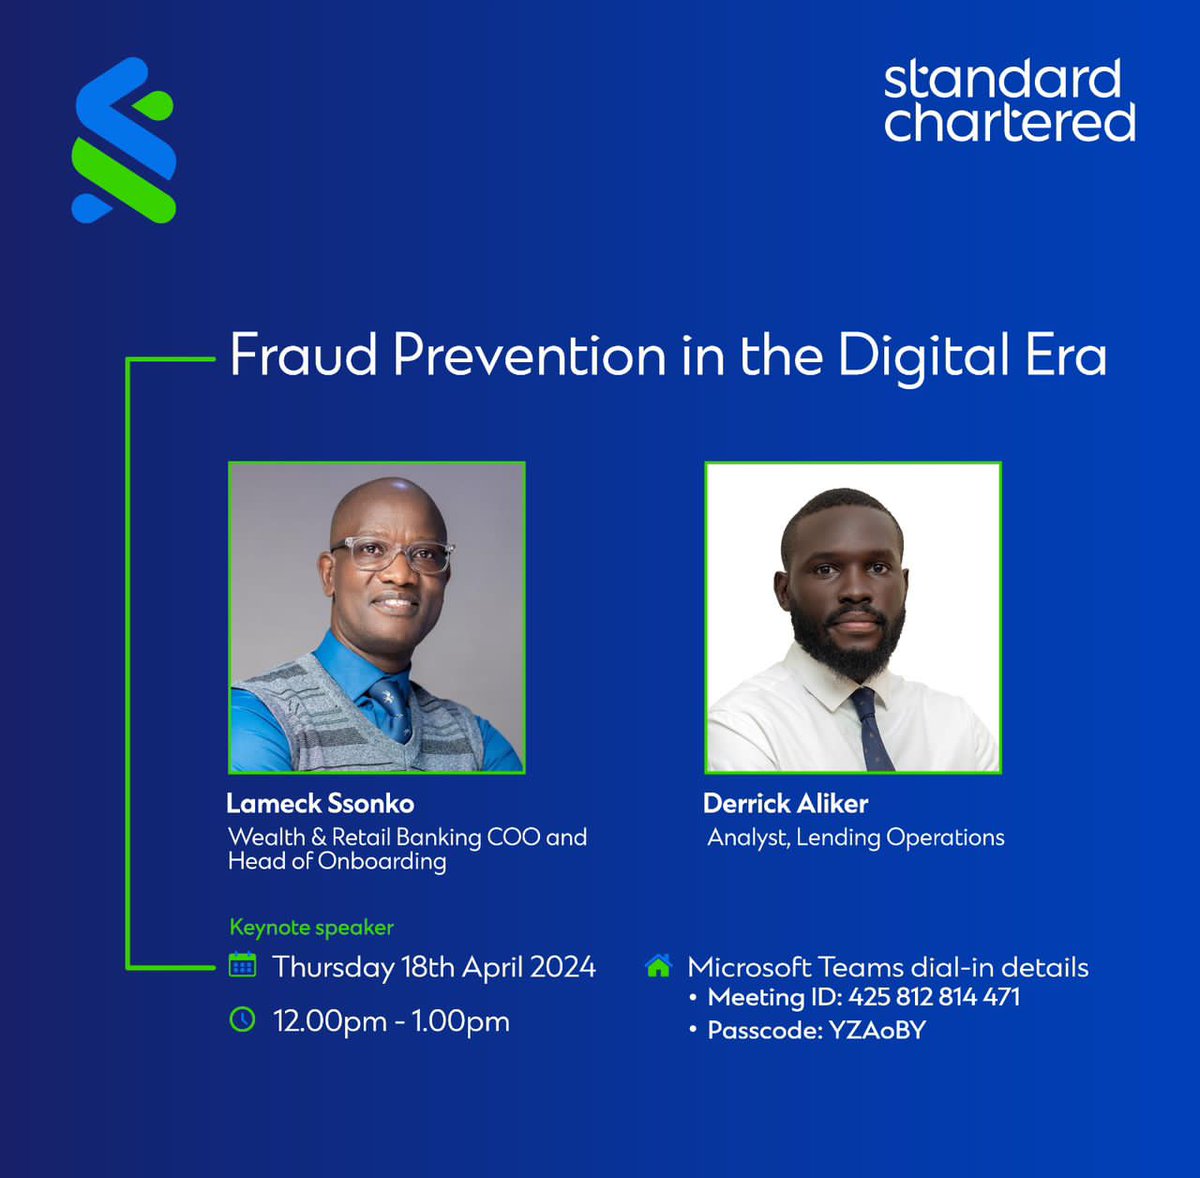 Dont miss to join us for an eye-opening and educational webinar on fraud prevention in the digital age .
Dont miss this🤗🤗🤗

Time; 12 to 1pm 
#ScEgabuddeAkapya #HereForGood